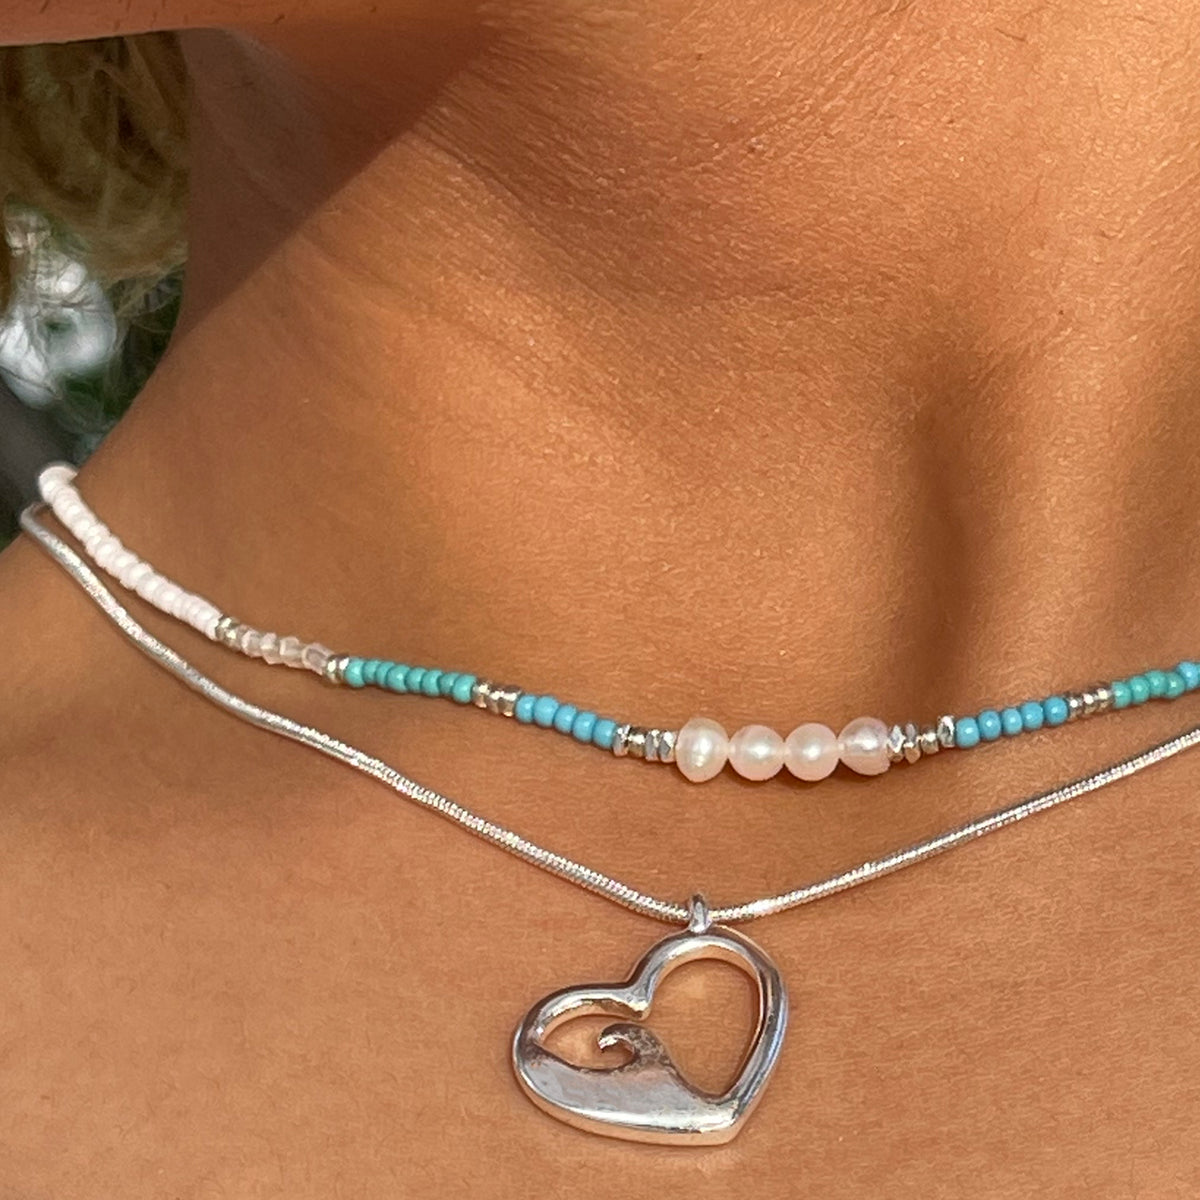 Heart Wave Snake Chain Necklace